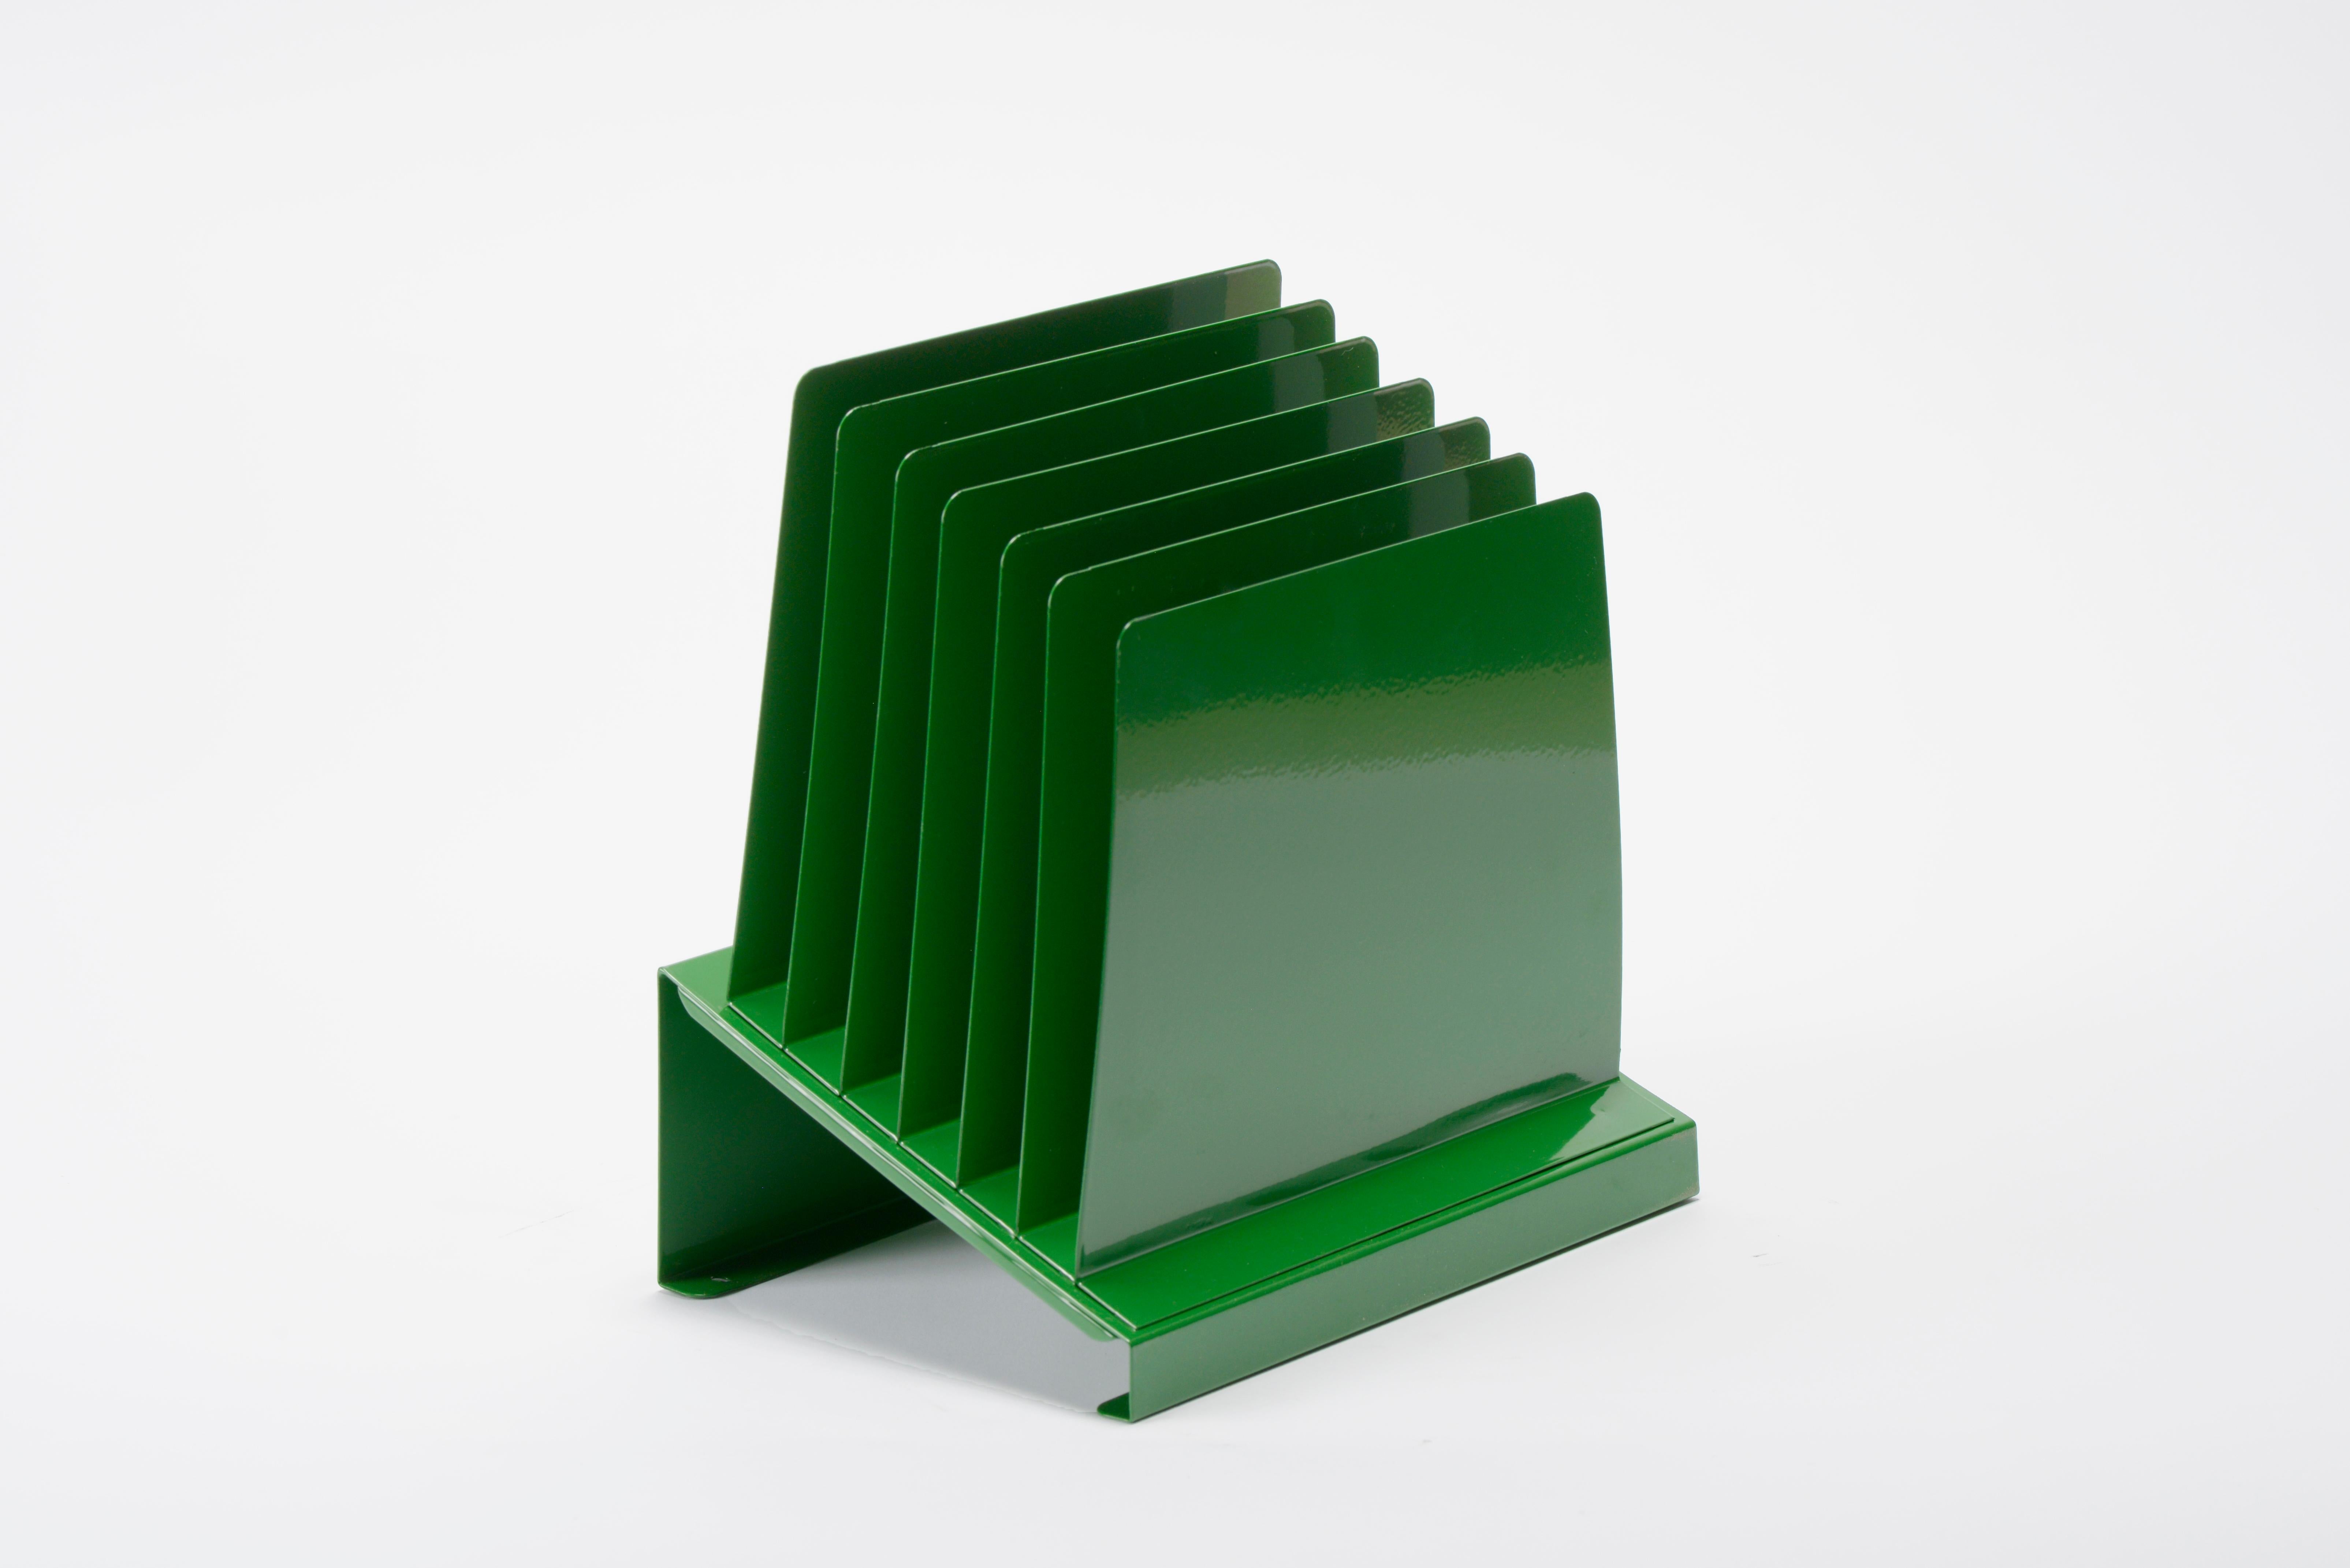 This 1970s retro office organizer is an uncommon style we've haven't come across until now. Featuring 6-slots in an iconic space-age design. Powder coat refinished in Kelly Green. This retro accessory is multifunctional, ideal for sorting mail,